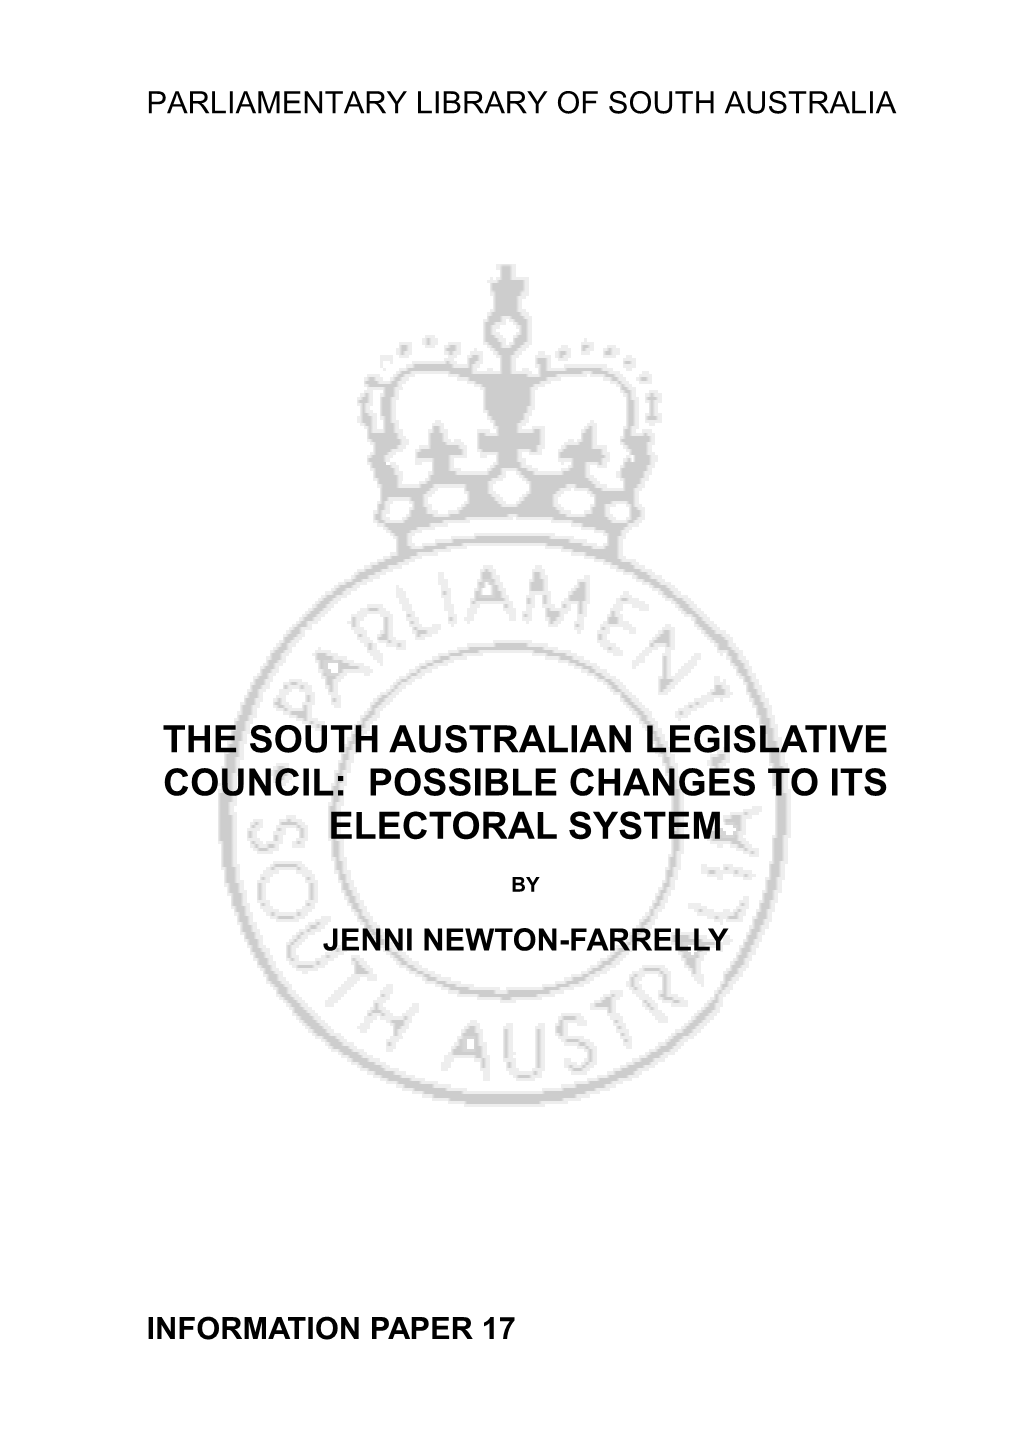 The South Australian Legislative Council: Possible Changes to Its Electoral System